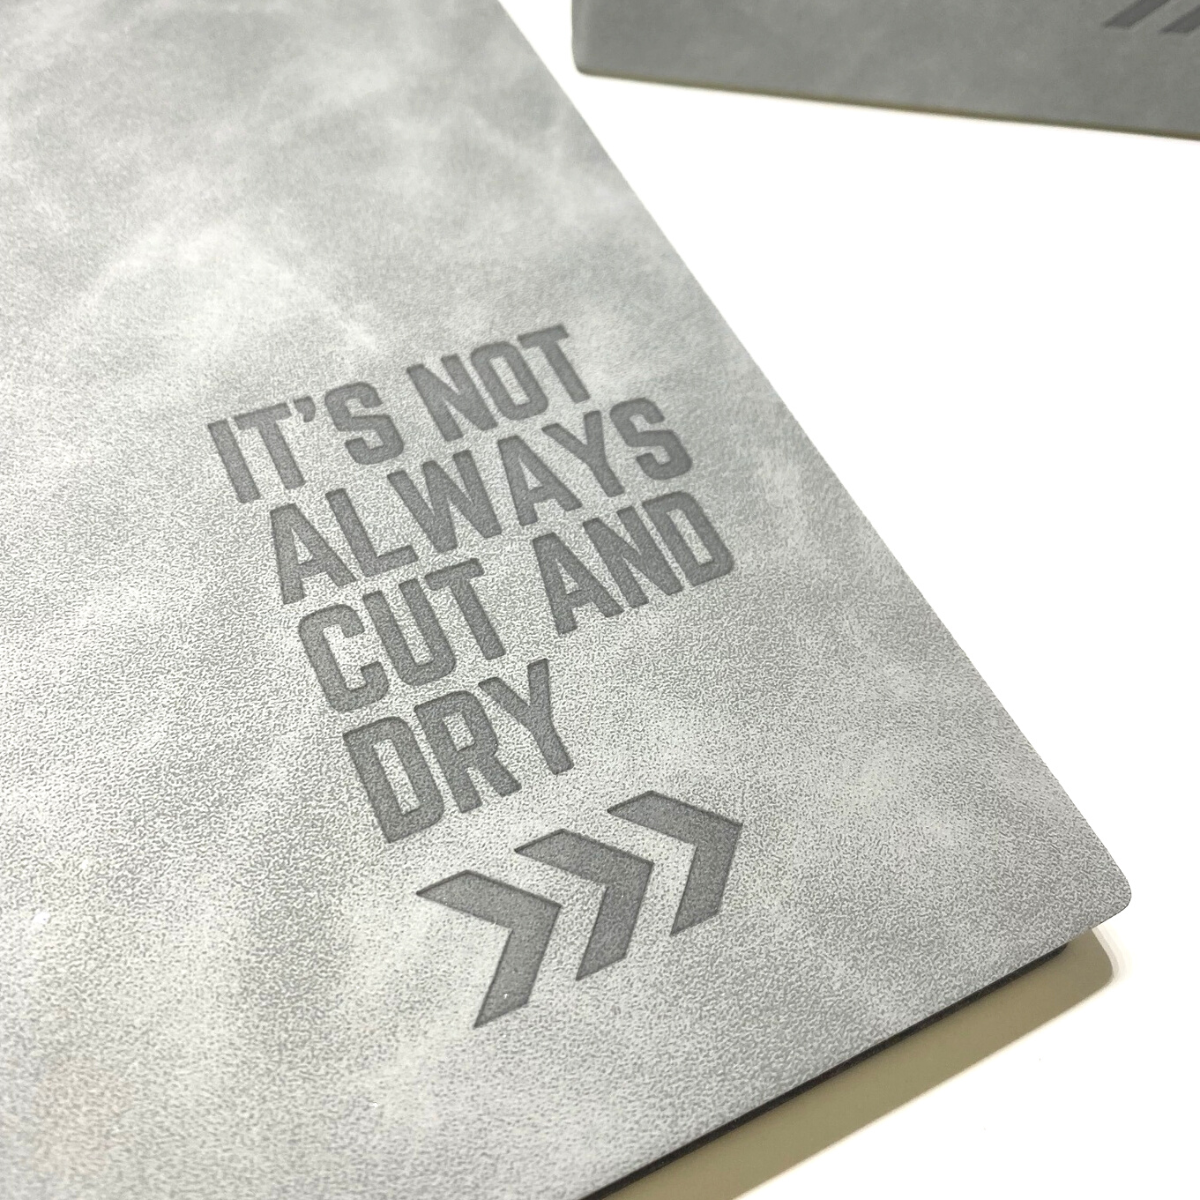 Notebook - It's not always Cut and Dry